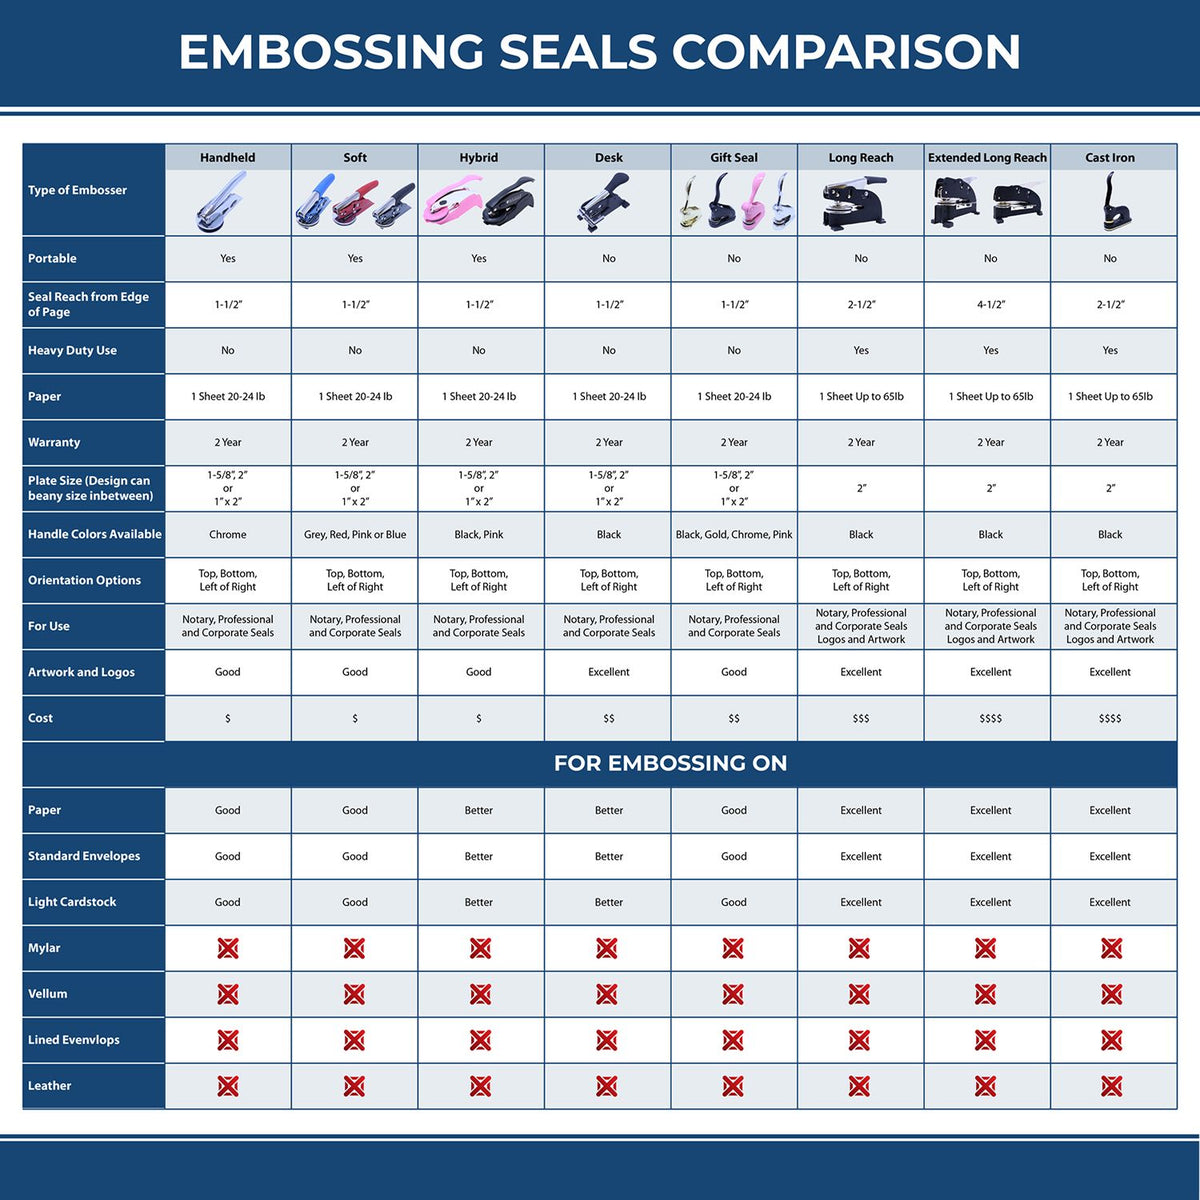 A comparison chart for the different types of mount models available for the Hybrid Iowa Engineer Seal